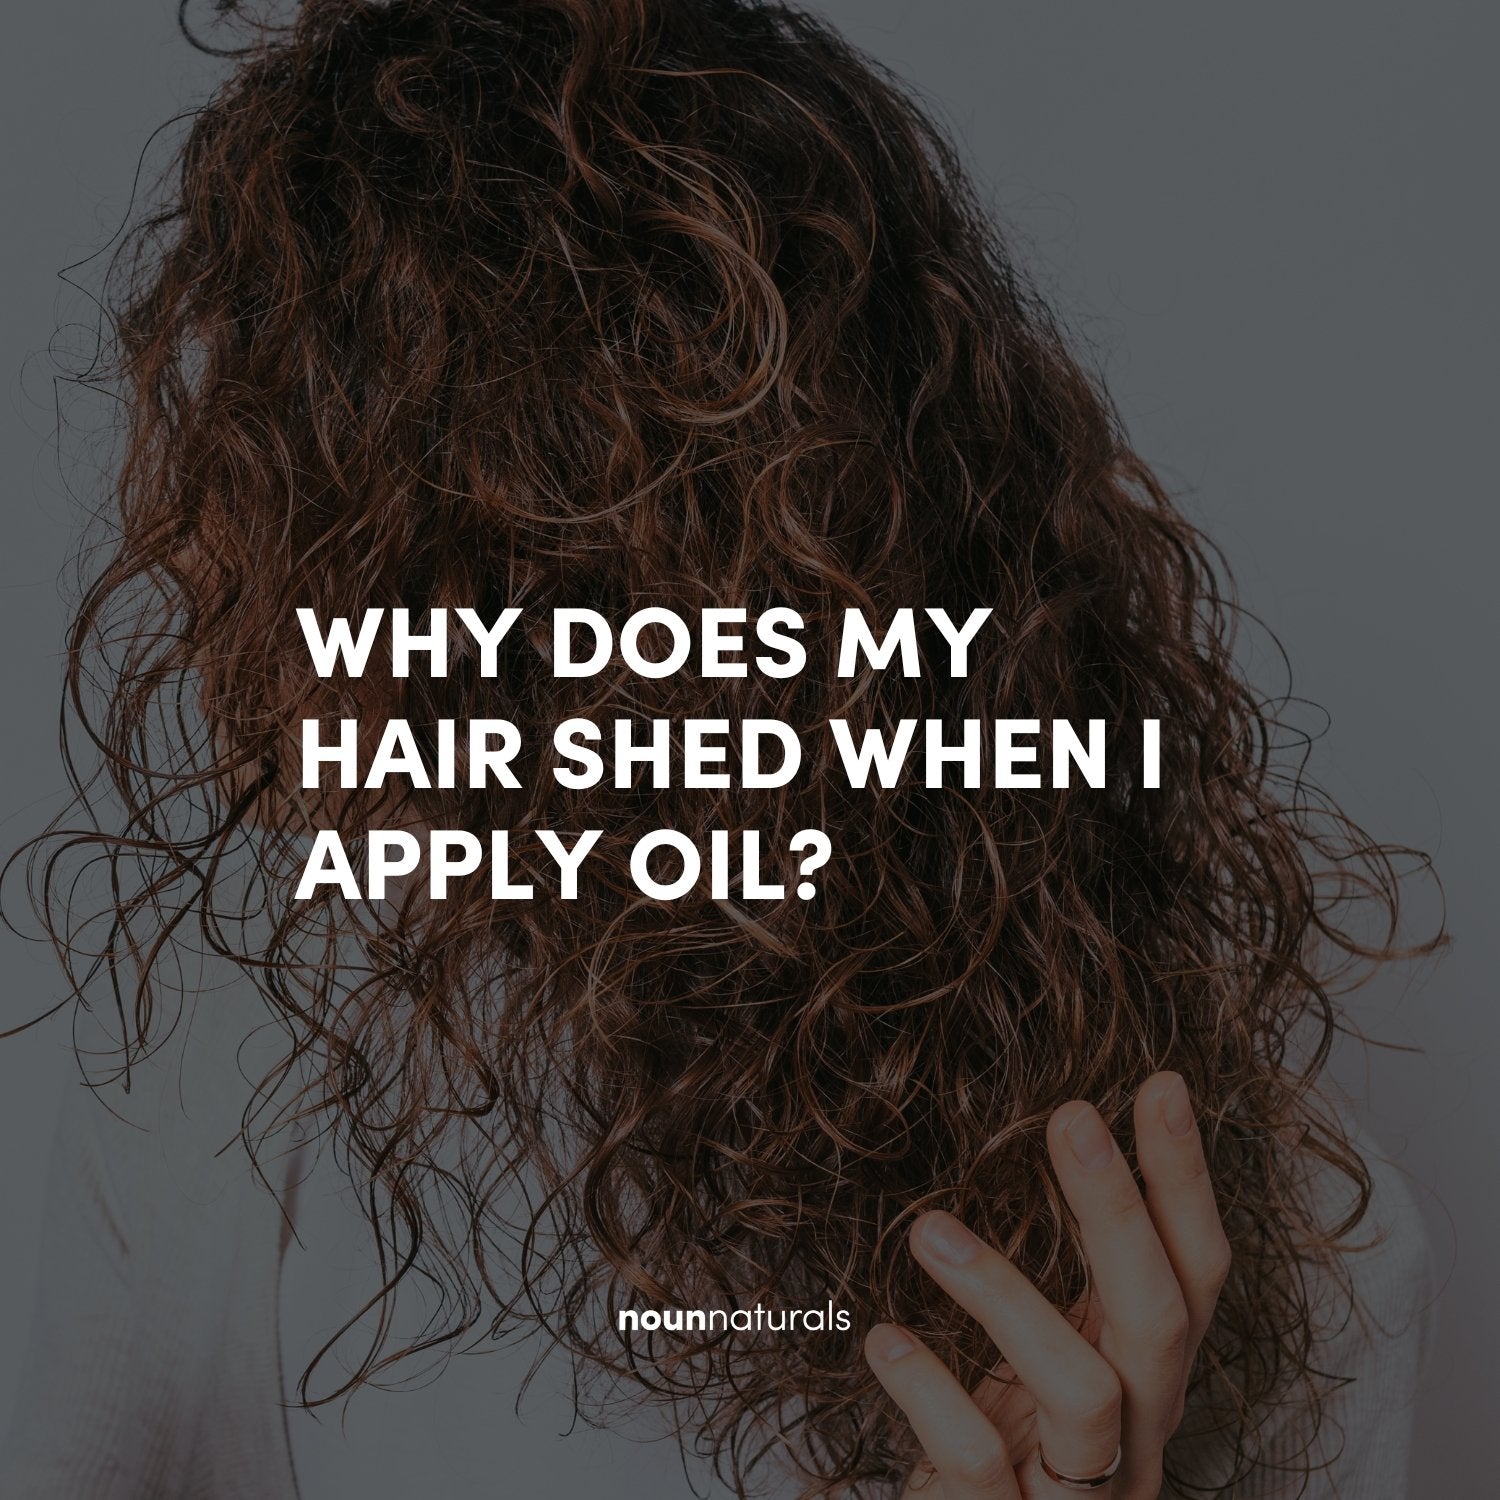 Why Does My Hair Shed When I Apply Oil? - Noun Naturals